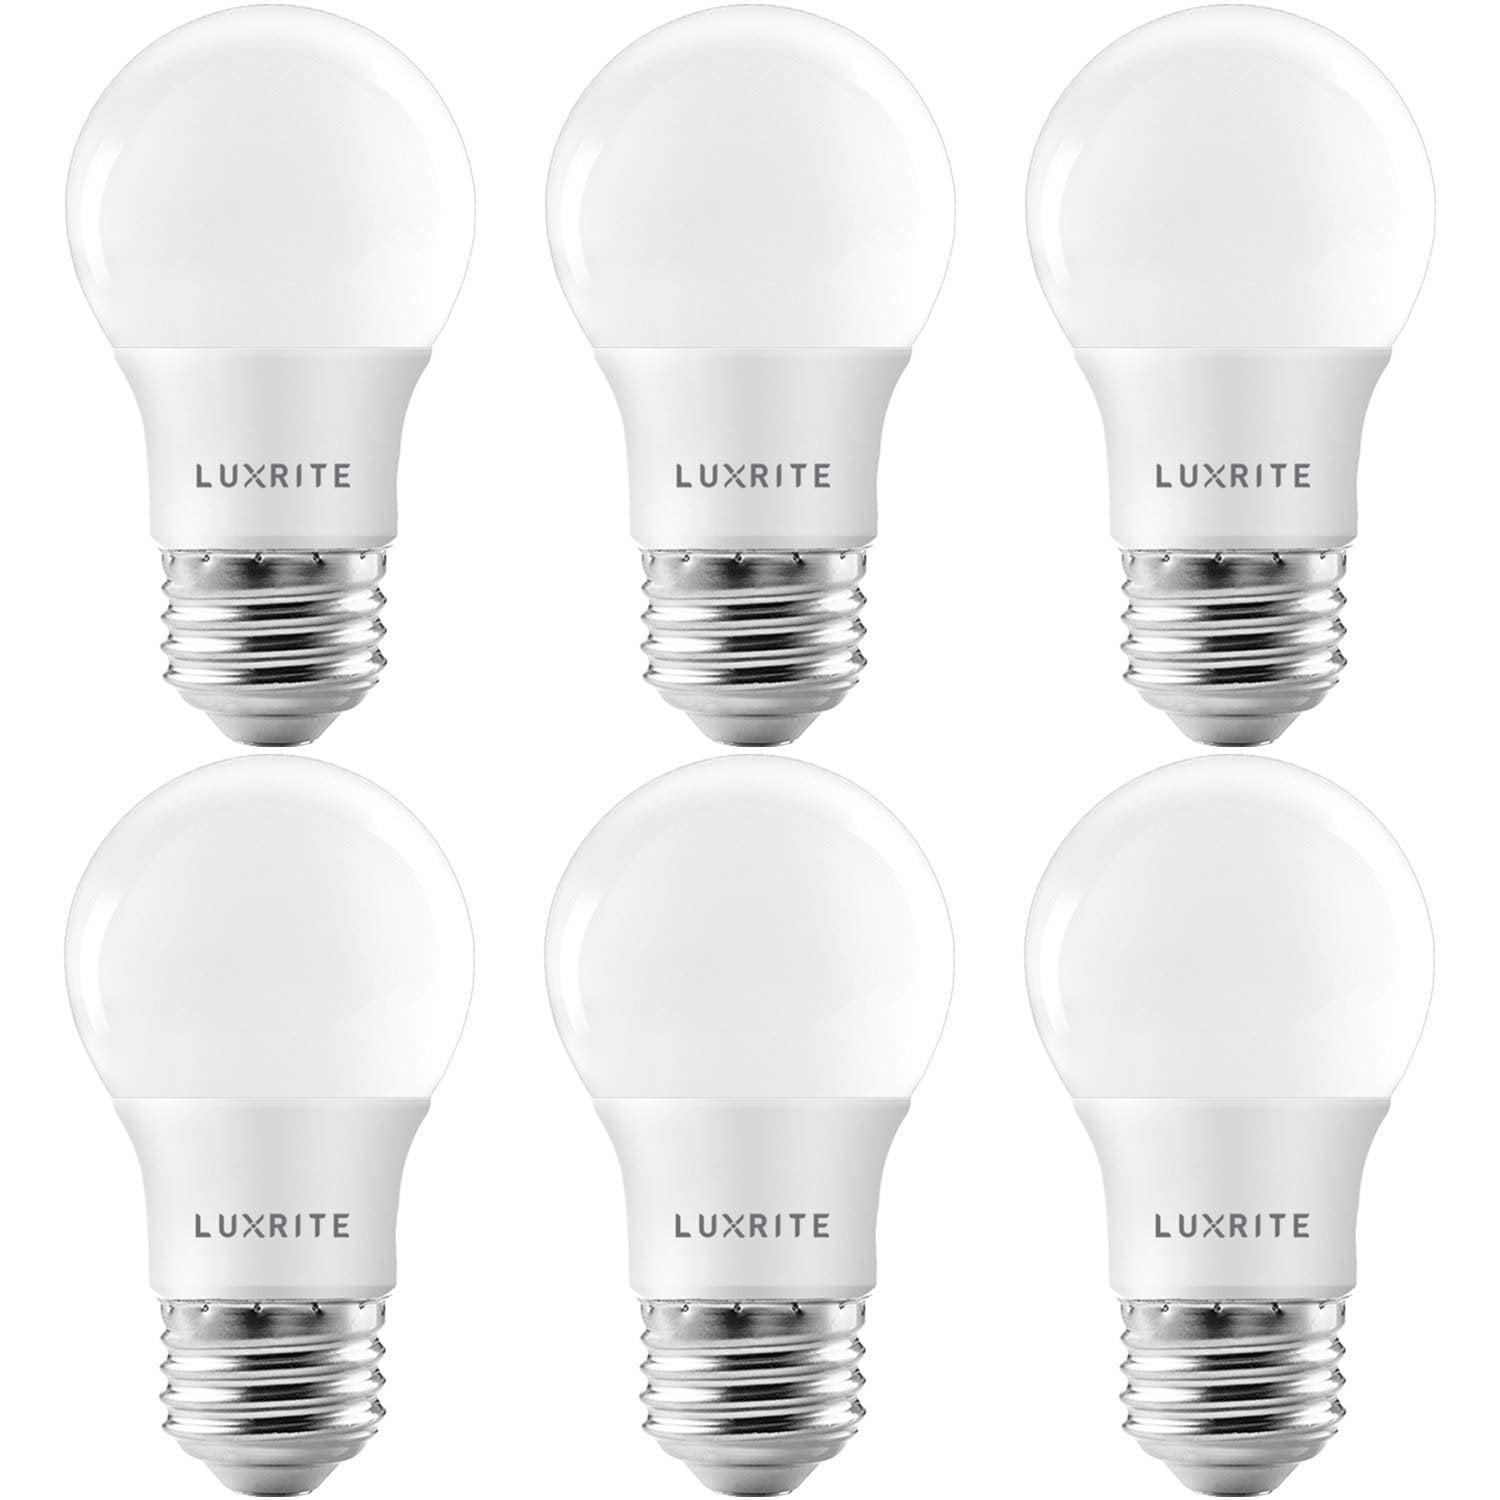 Damp Rated 800 Lumens 6-Pack Luxrite LED Filament Bulb A19 Great for Any Indoor/Outdoor Use 7W Bulb to Replace 60W Incandesent Bulb E26 LED Bulb UL Listed Dimmable Warm White 2700K 